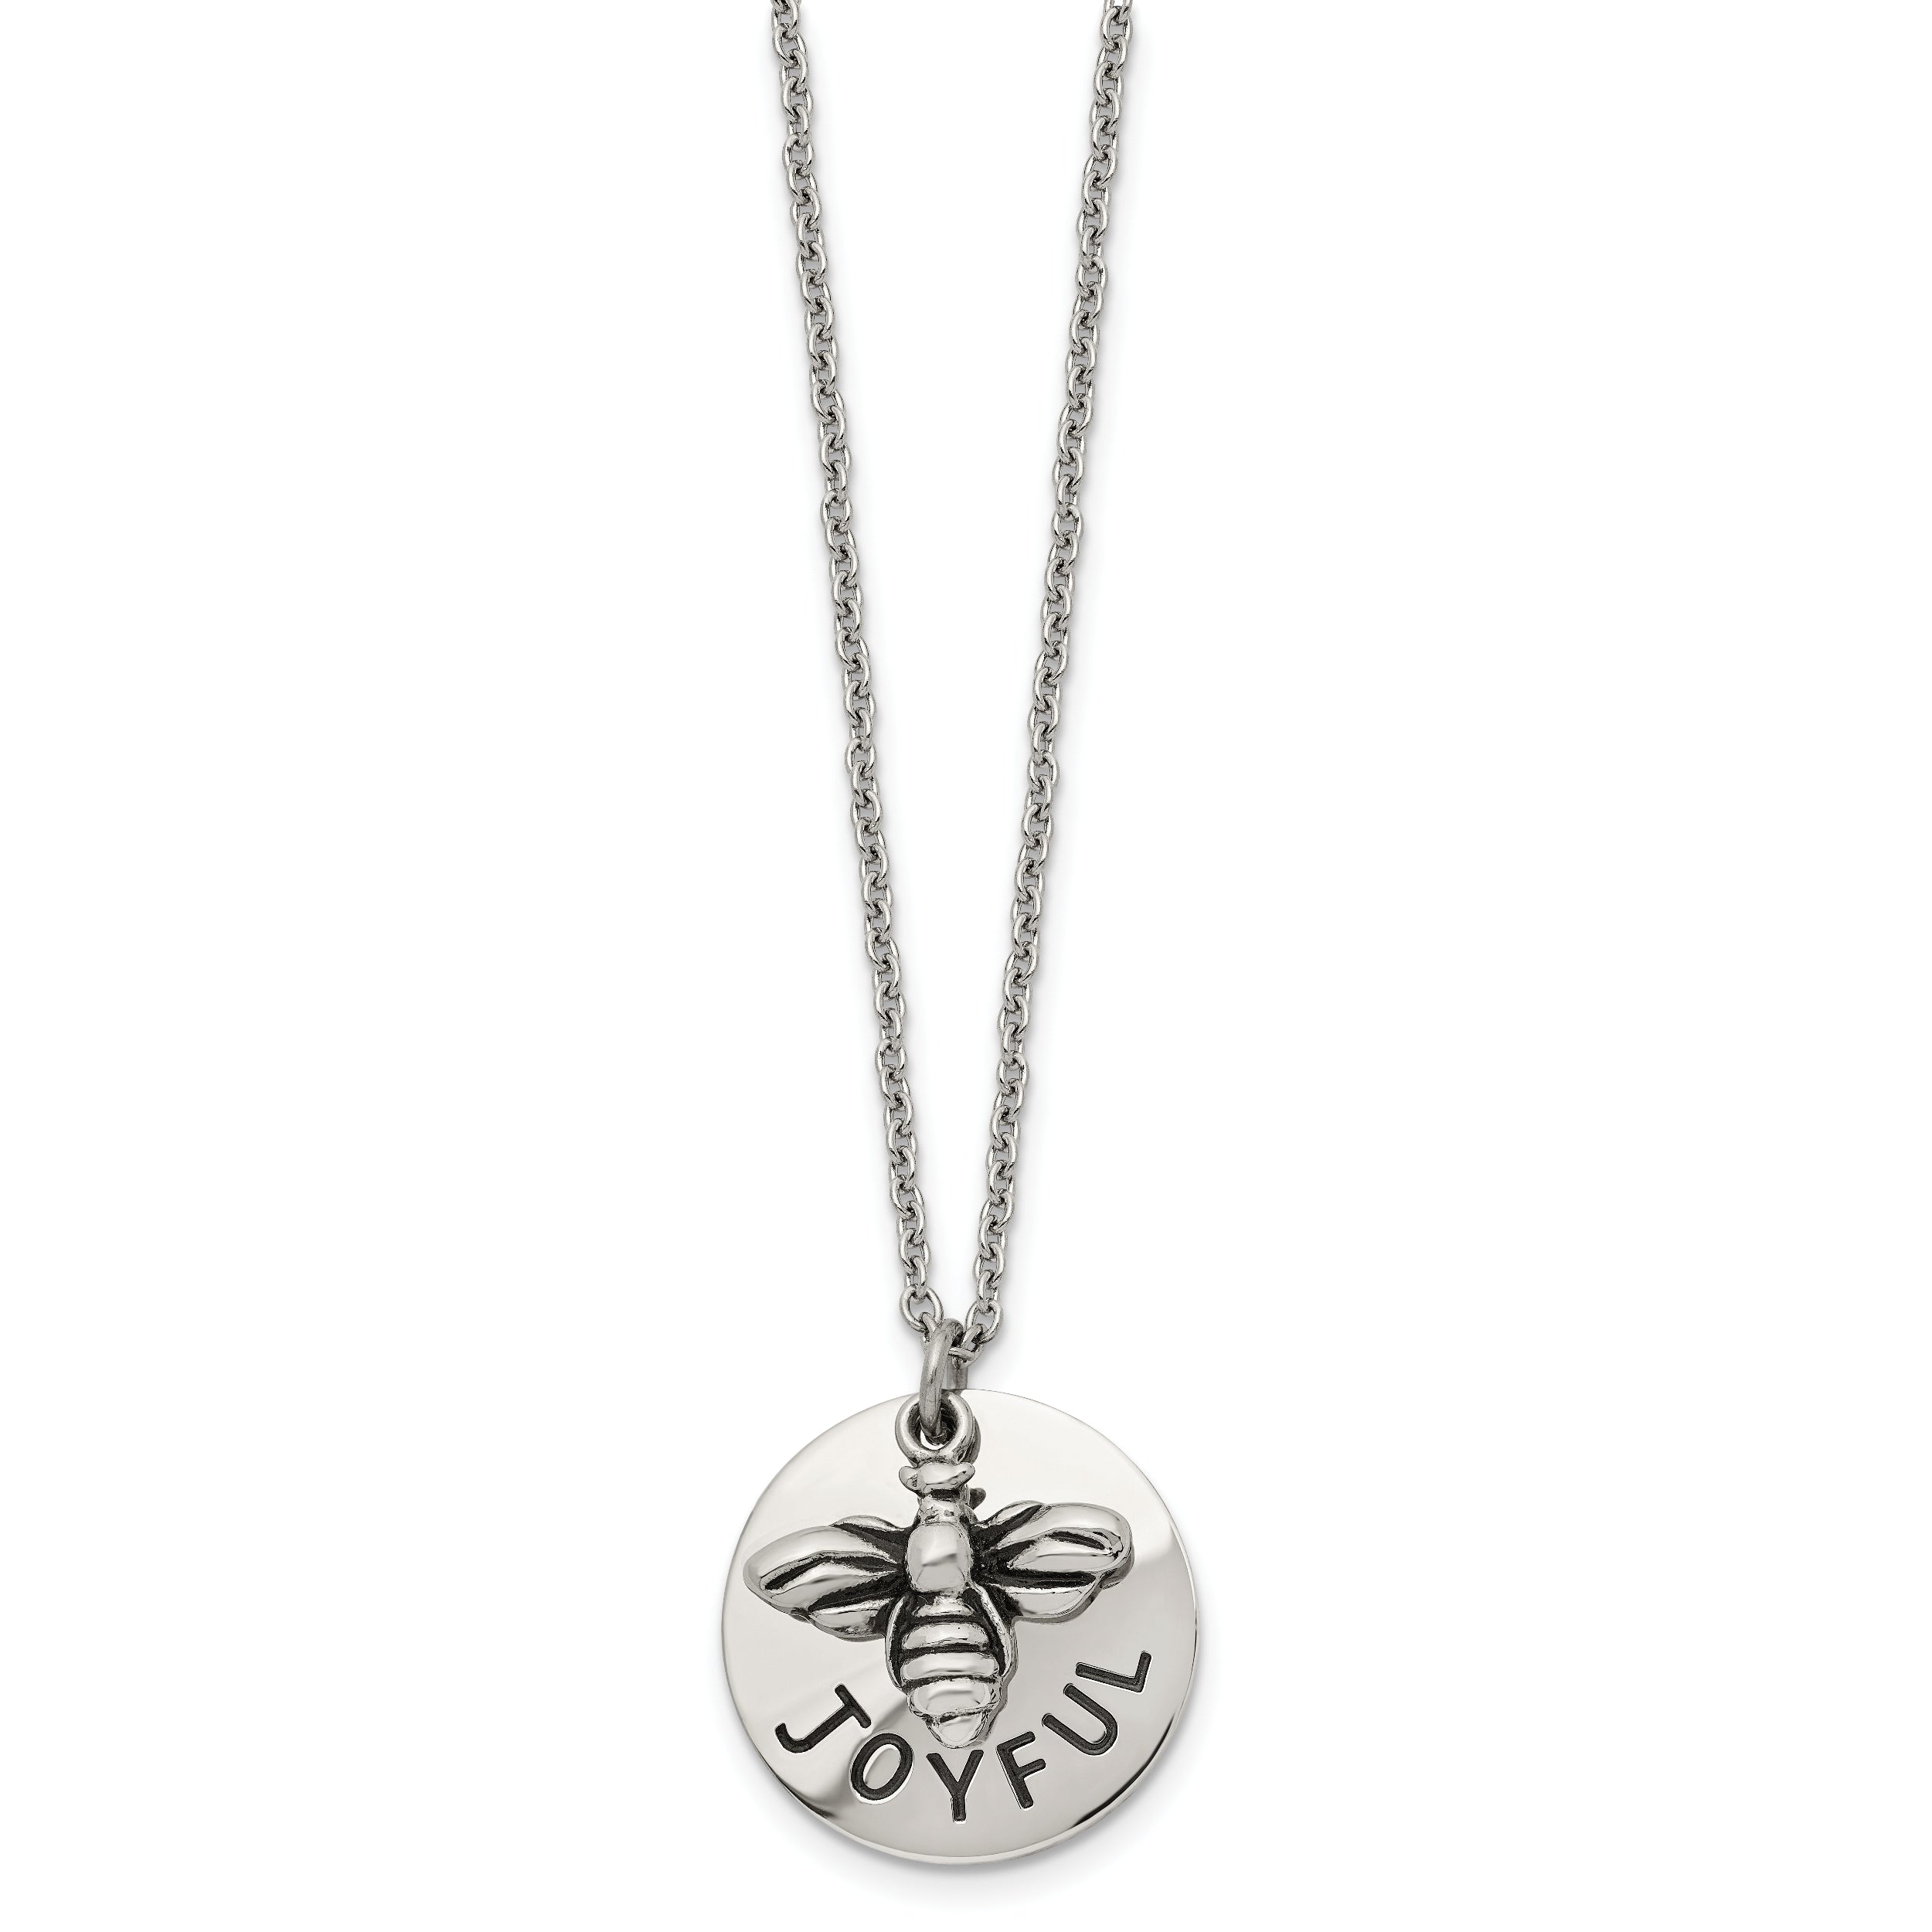 Chisel Stainless Steel Polished and Enameled JOYFUL Bumble Bee Pendant on a 22 inch Cable Chain Necklace